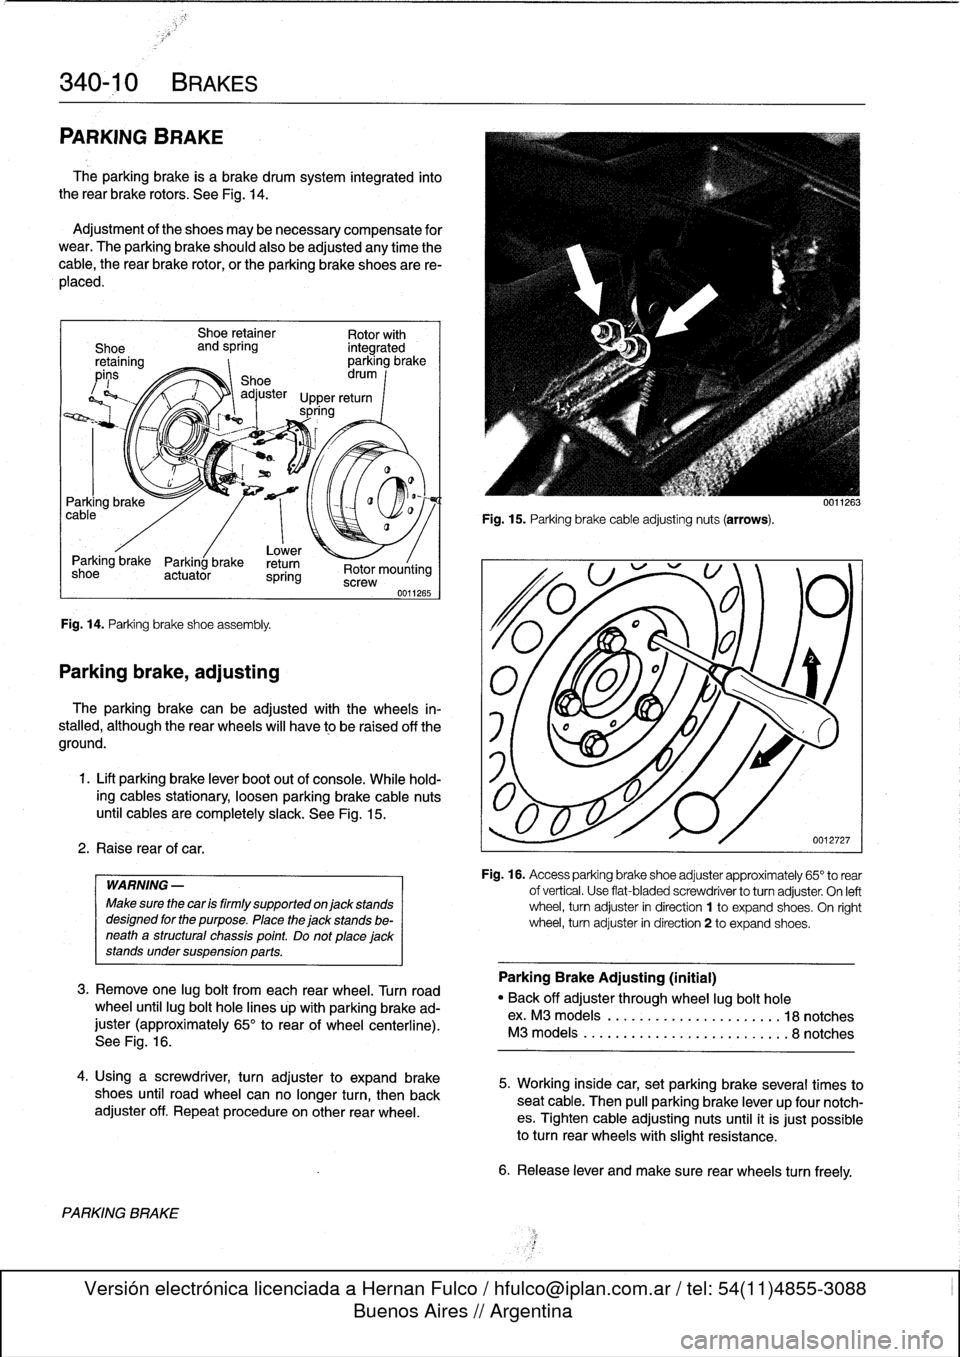 BMW 325i 1993 E36 Workshop Manual 
340-
1
0
BRAKES

PARKING
BRAKE

The
parking
brake
is
a
brake
drum
system
integrated
into
the
rear
brake
rotors
.
See
Fig
.
14
.

Adjustment
of
the
shoes
may
benecessary
compensate
for
wear
.
The
park